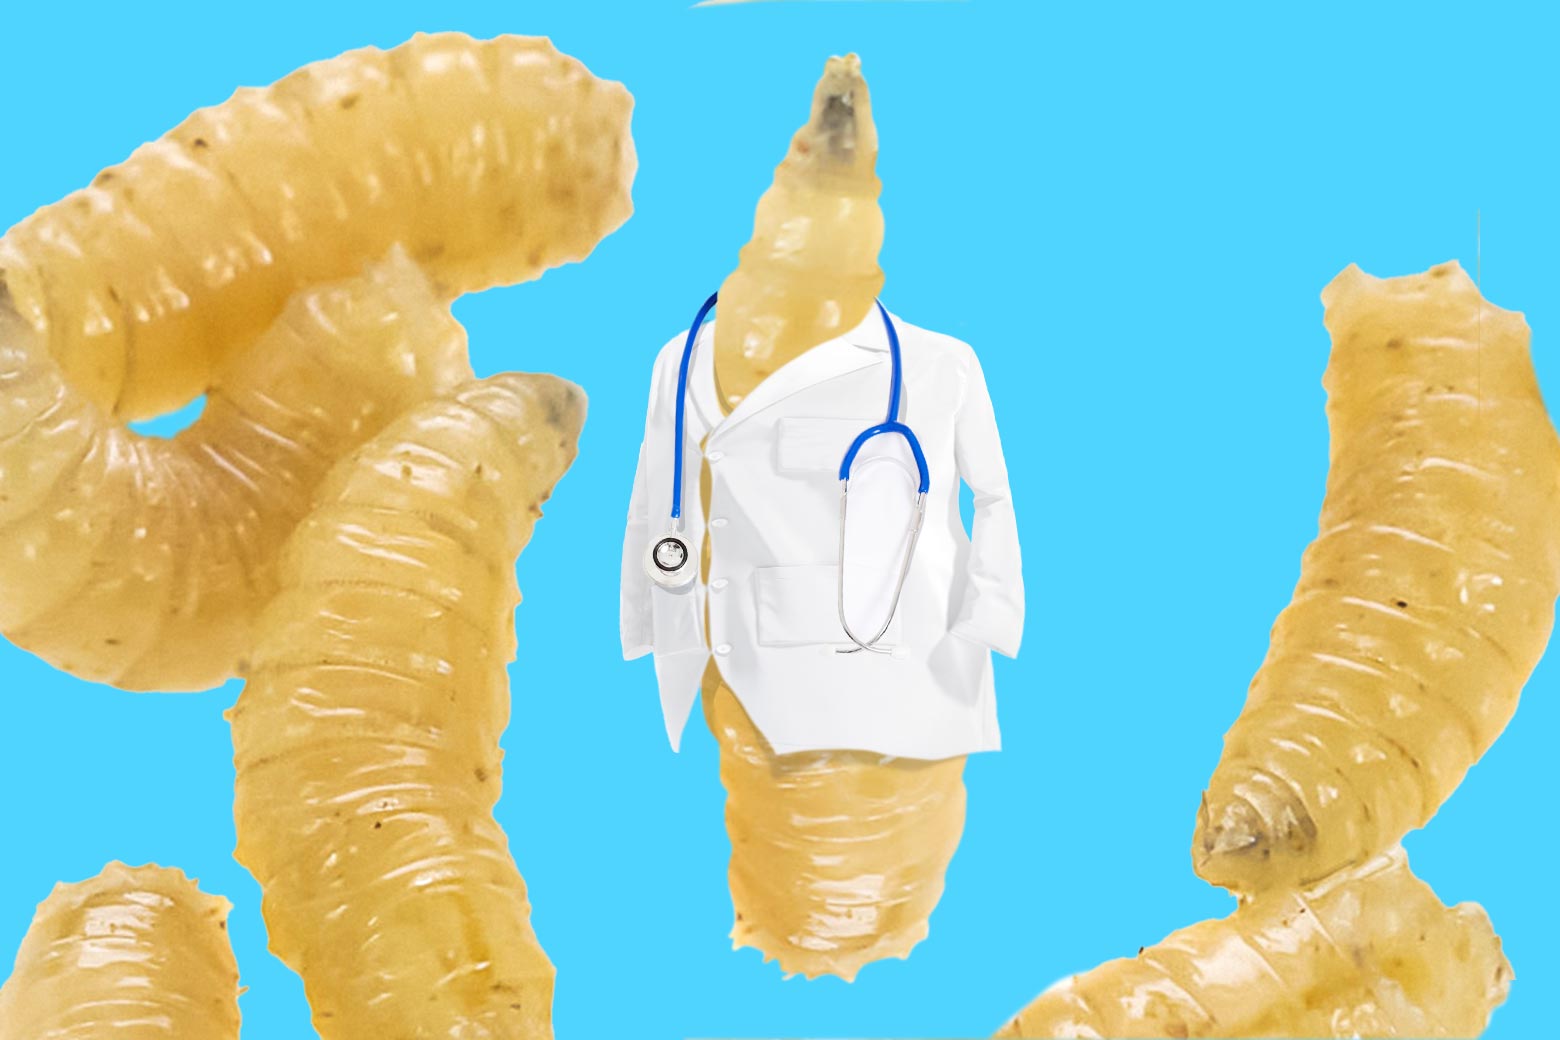 A close-up of maggots, but one is wearing a doctor's coat and stethoscope. 